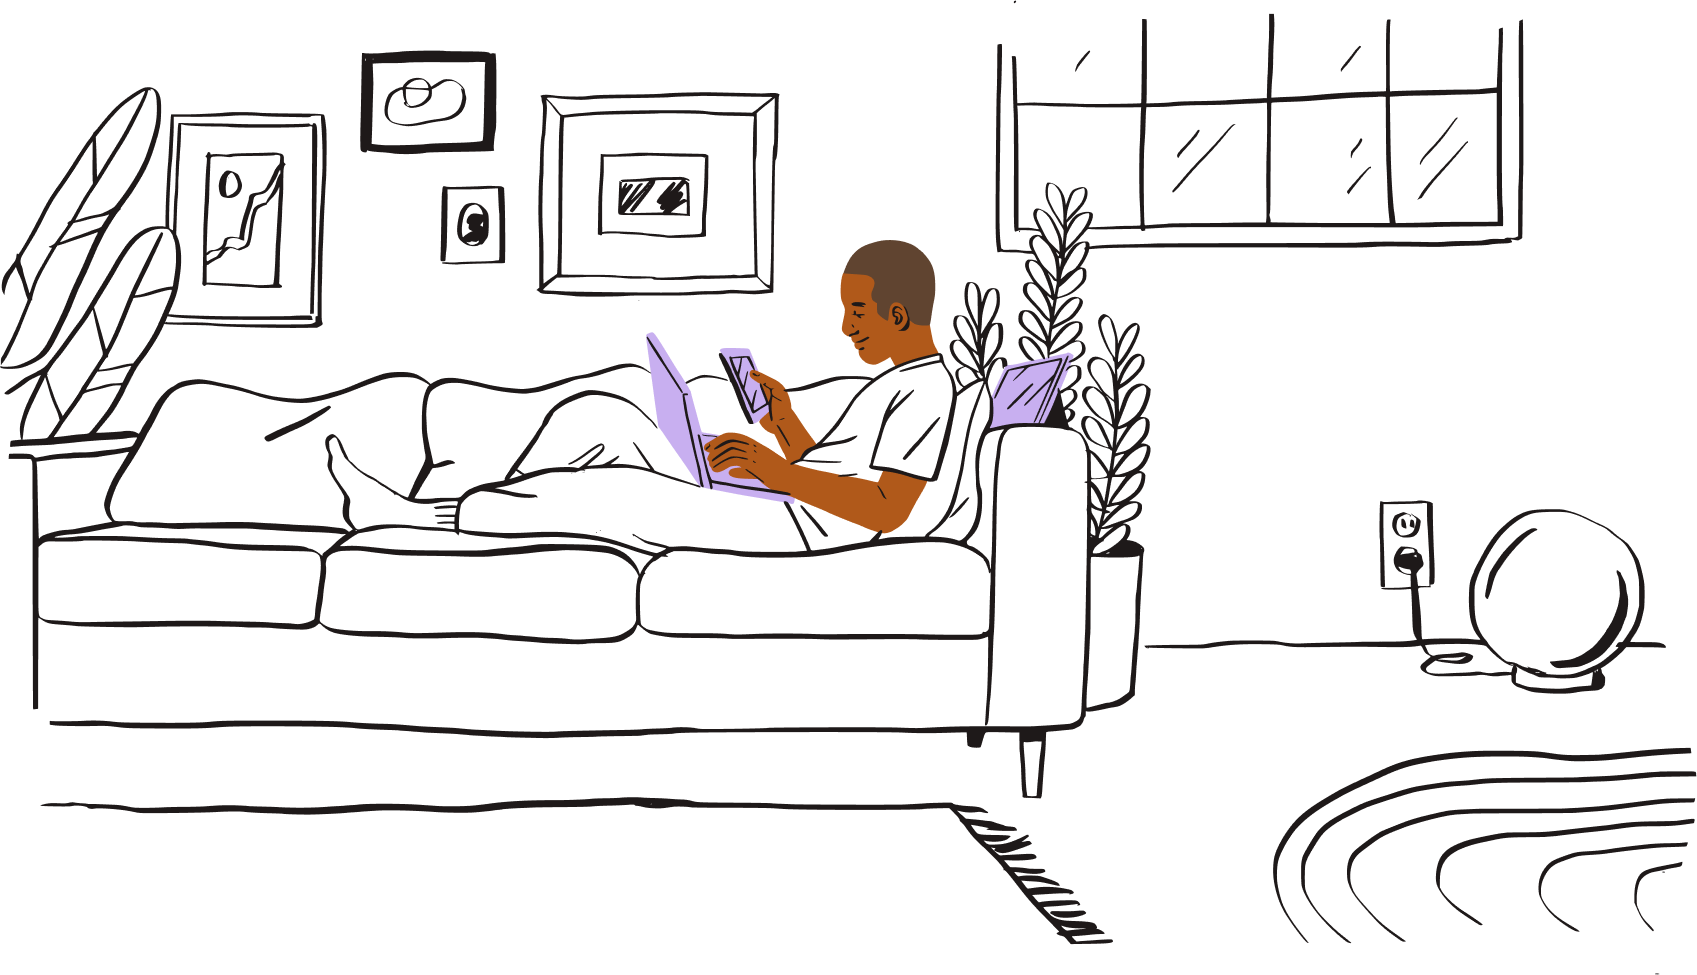 An illustration of a person sat on a sofa with multiple devices looking reassured.